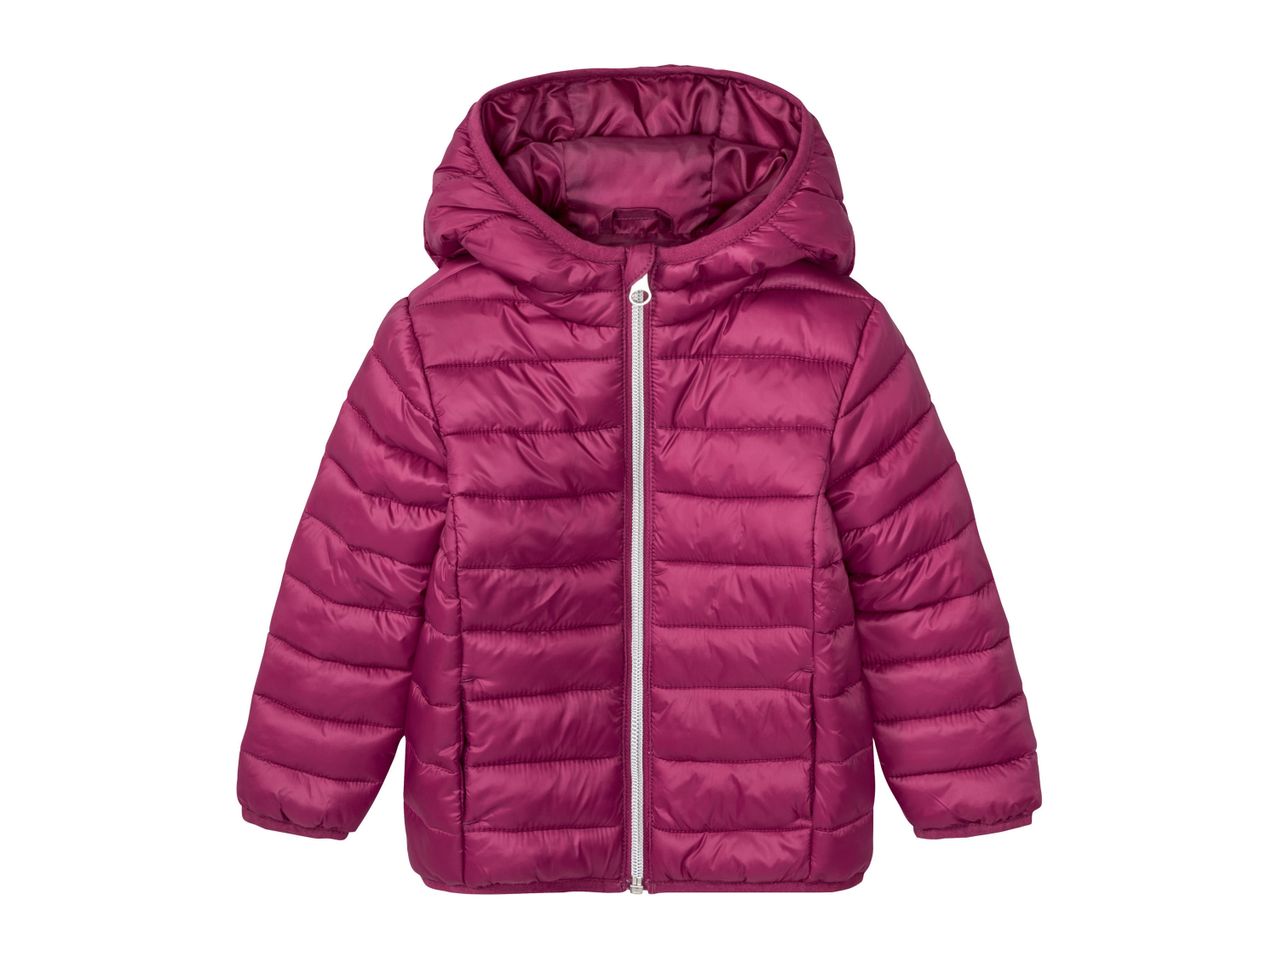 Go to full screen view: Girl’s Lightweight Jacket - Image 2